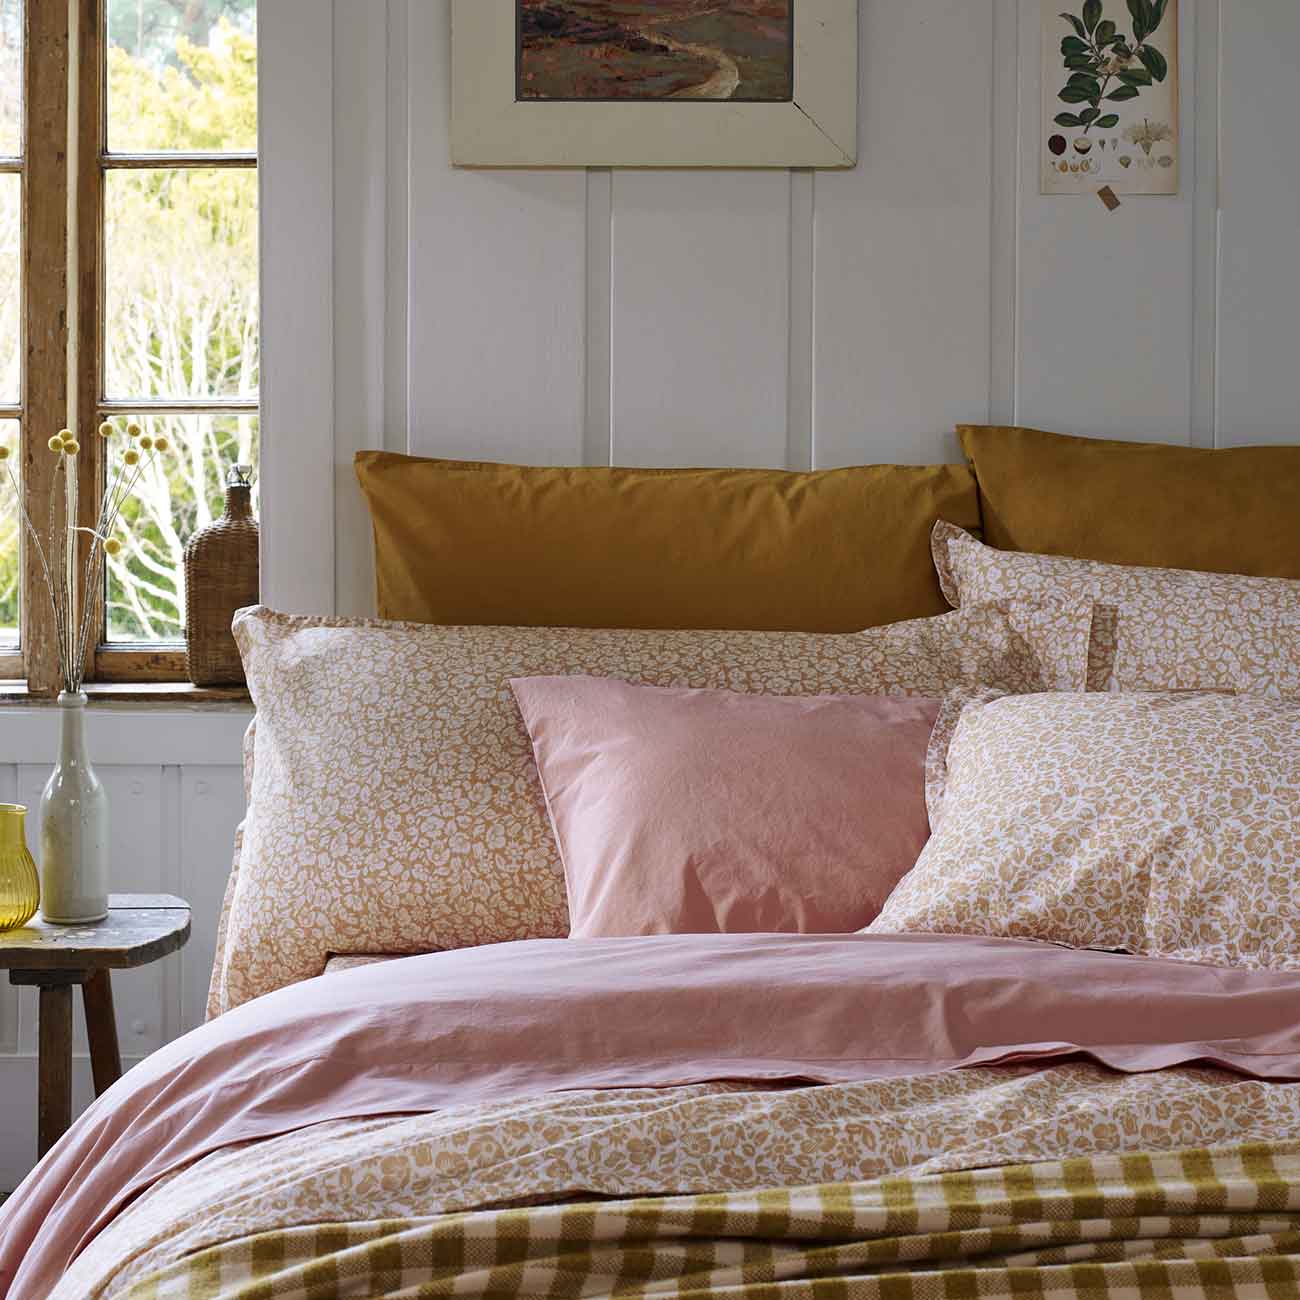 Butterscotch Meadow Floral Printed, French rose and Butterscotch Cotton Bedding with Ochre Gingham Wool Blanket